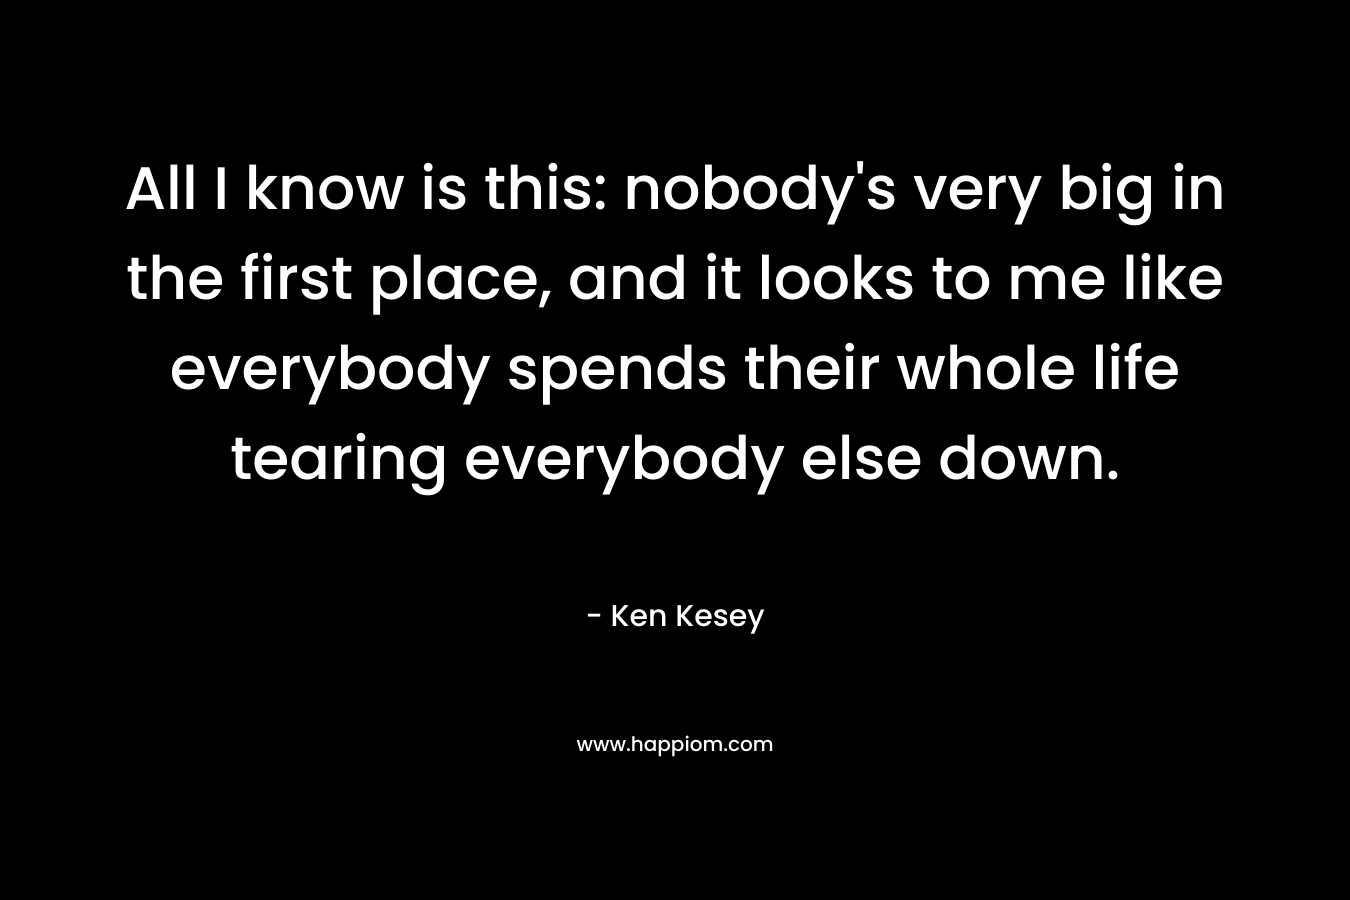 All I know is this: nobody's very big in the first place, and it looks to me like everybody spends their whole life tearing everybody else down.